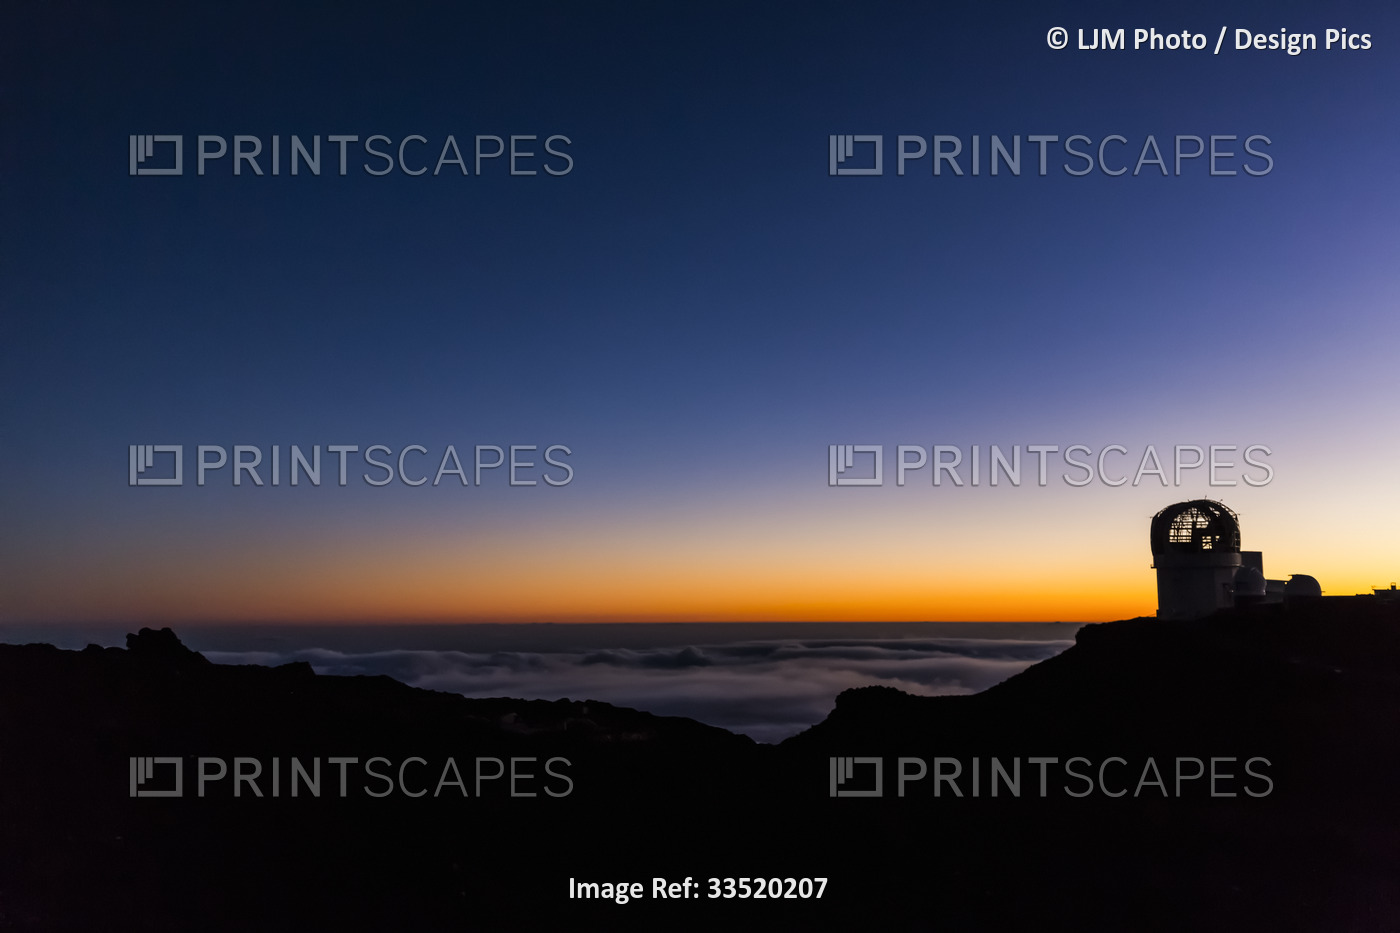 Haleakala Observatory buildings above the clouds along the top of a silhouetted ...